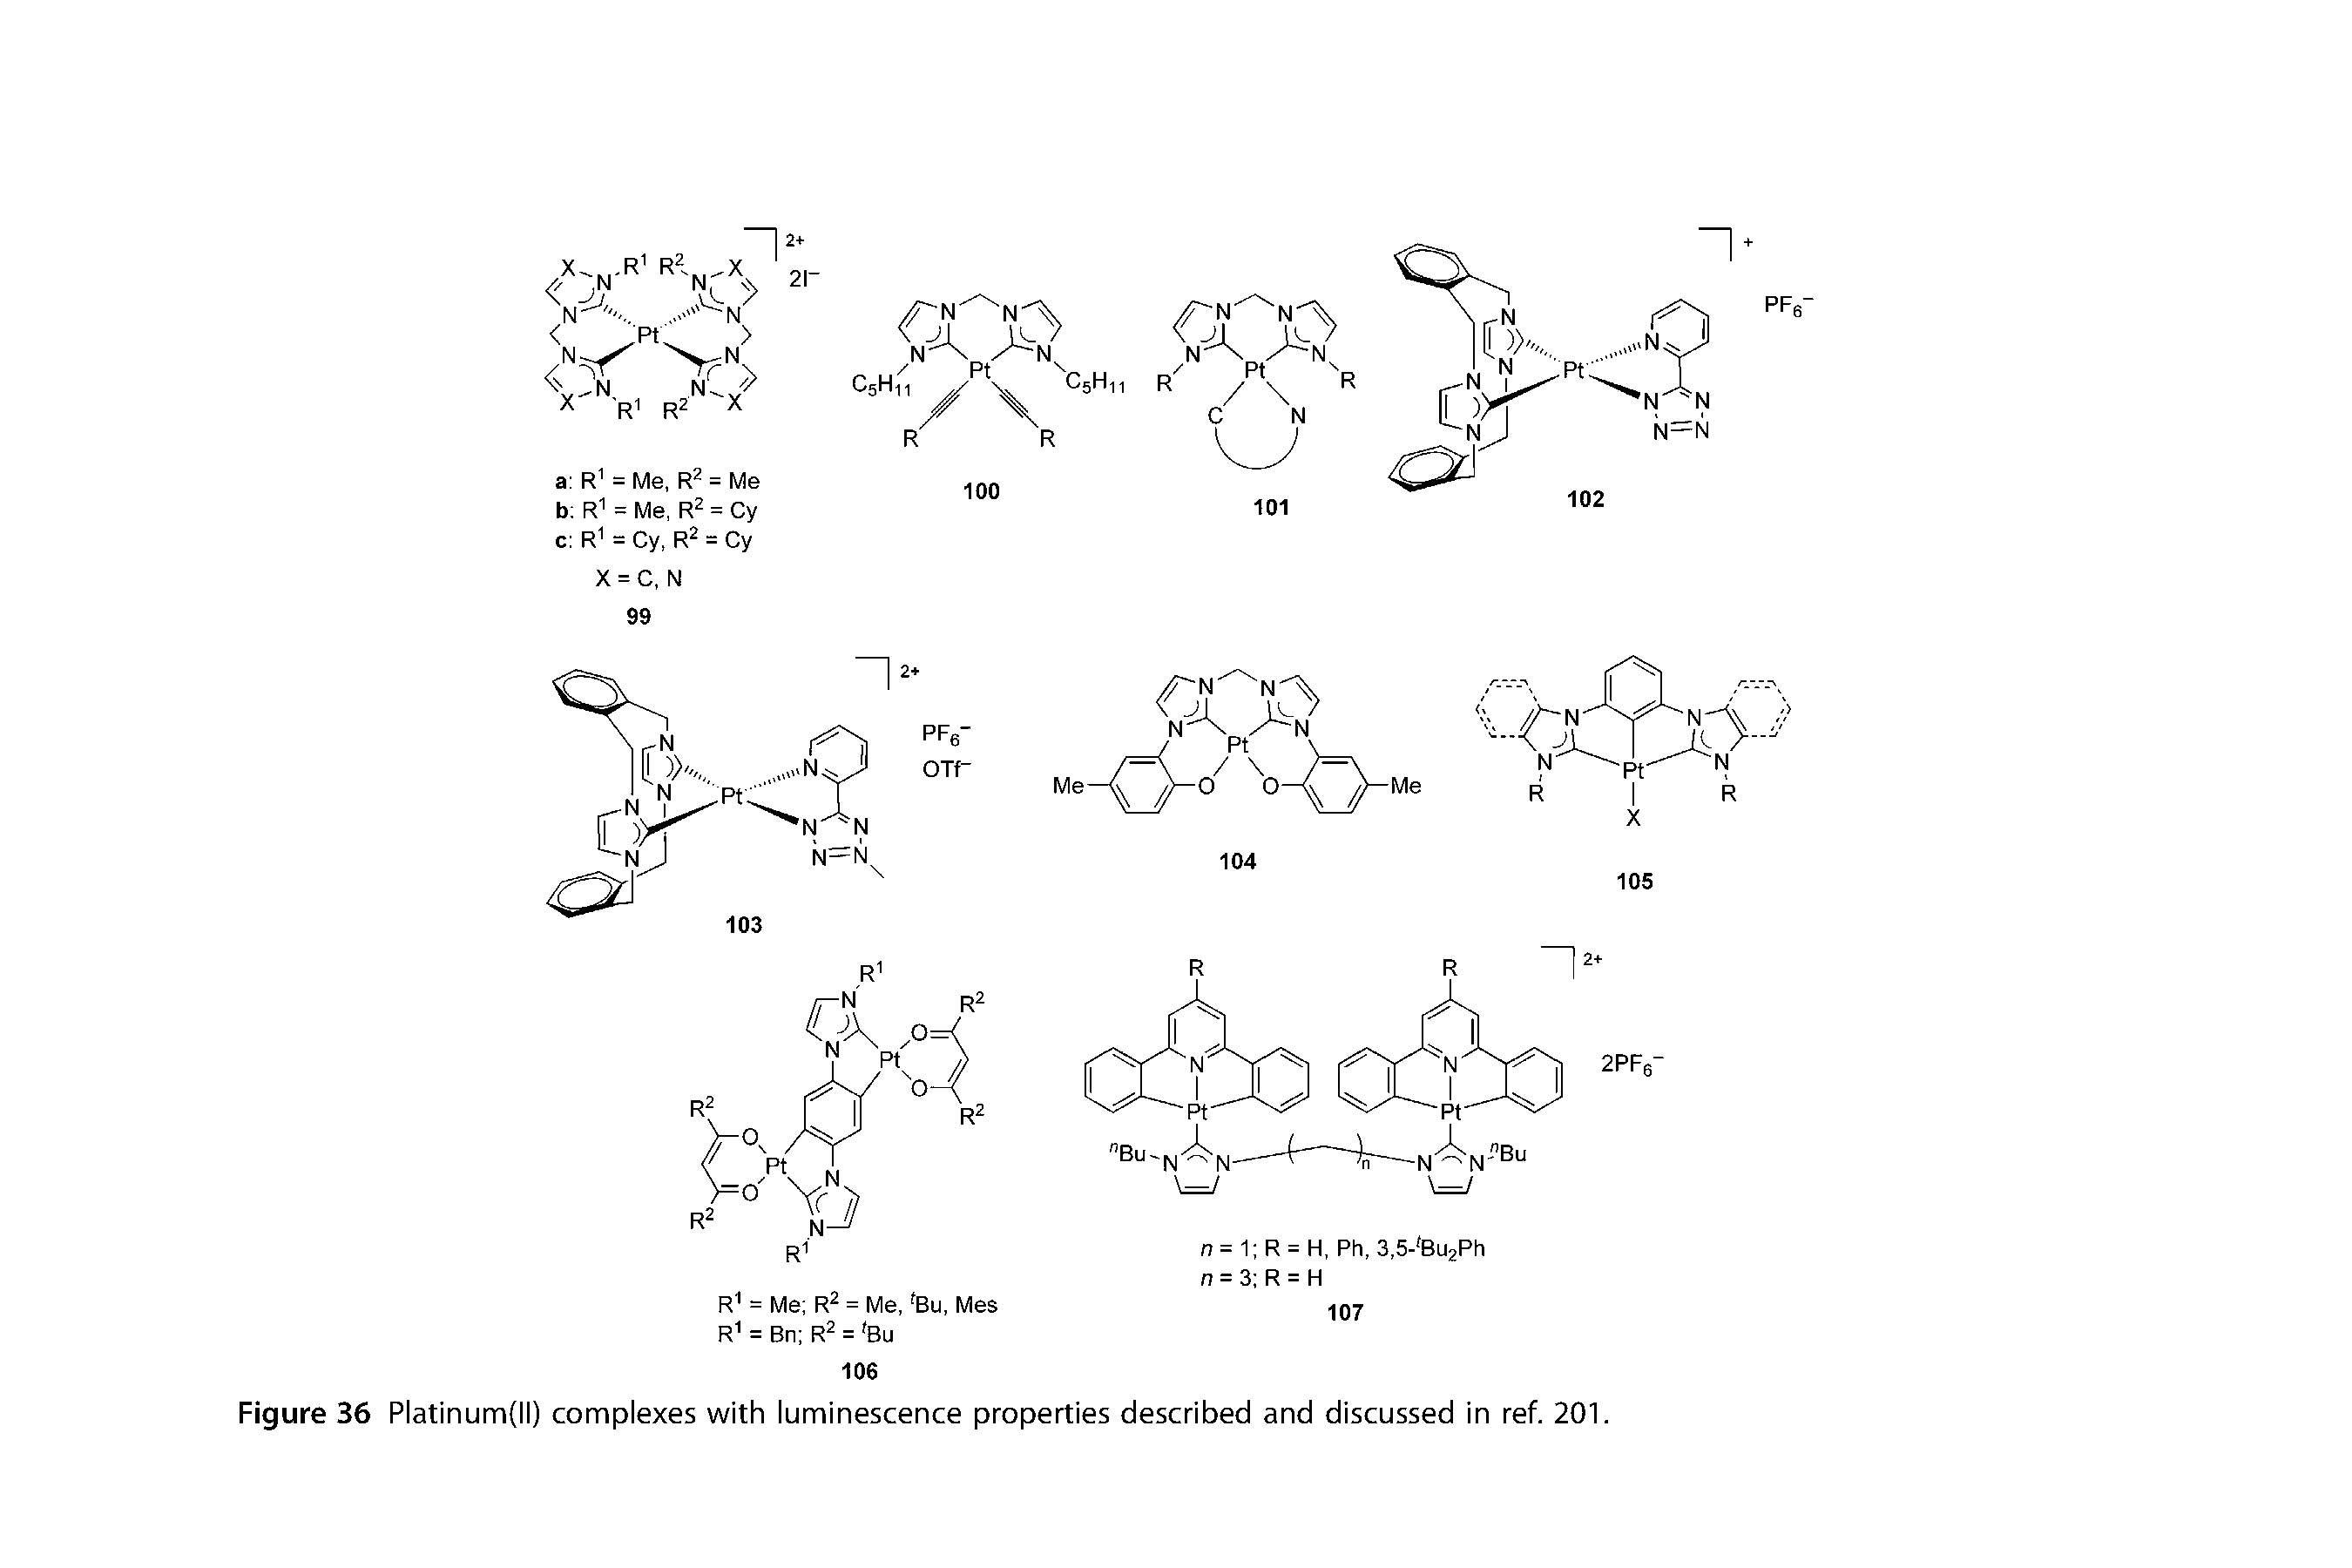 Figure 36 Platinum(ll) complexes with luminescence properties described and discussed in ref. 201.